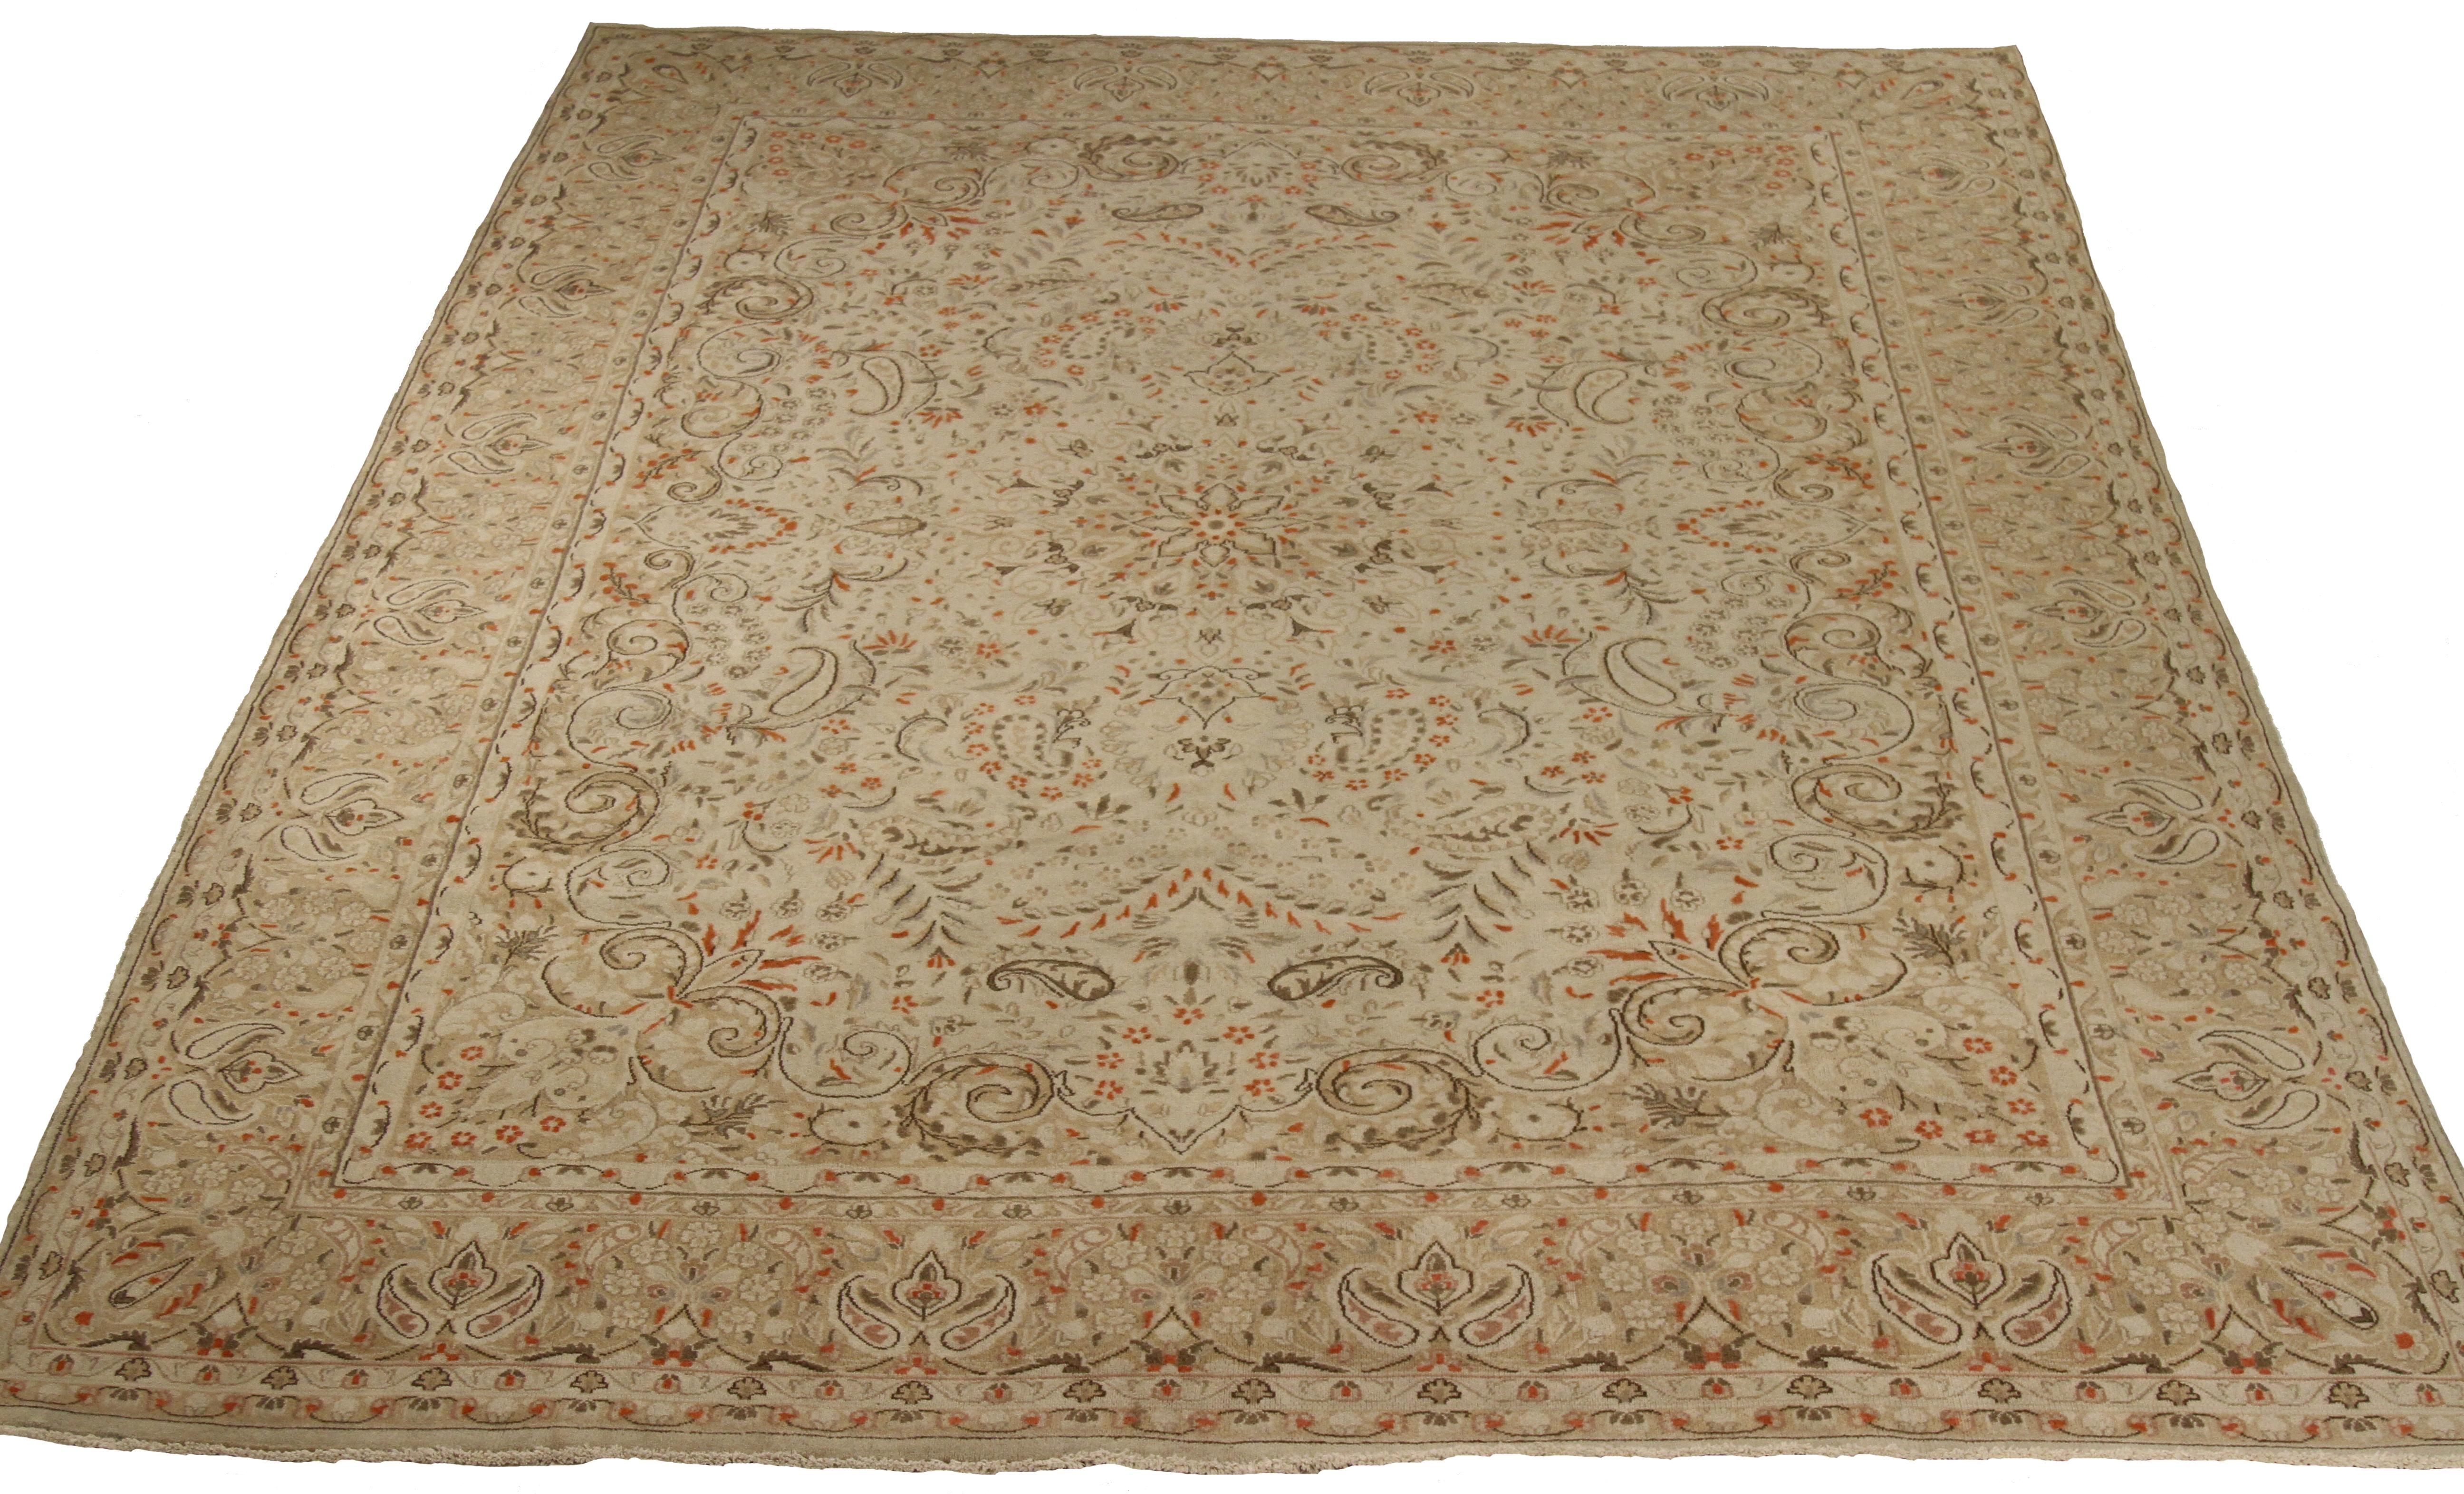 Antique hand-woven Persian area rug made from fine wool and all-natural vegetable dyes that are safe for people and pets. It features traditional Kerman weaving depicting 